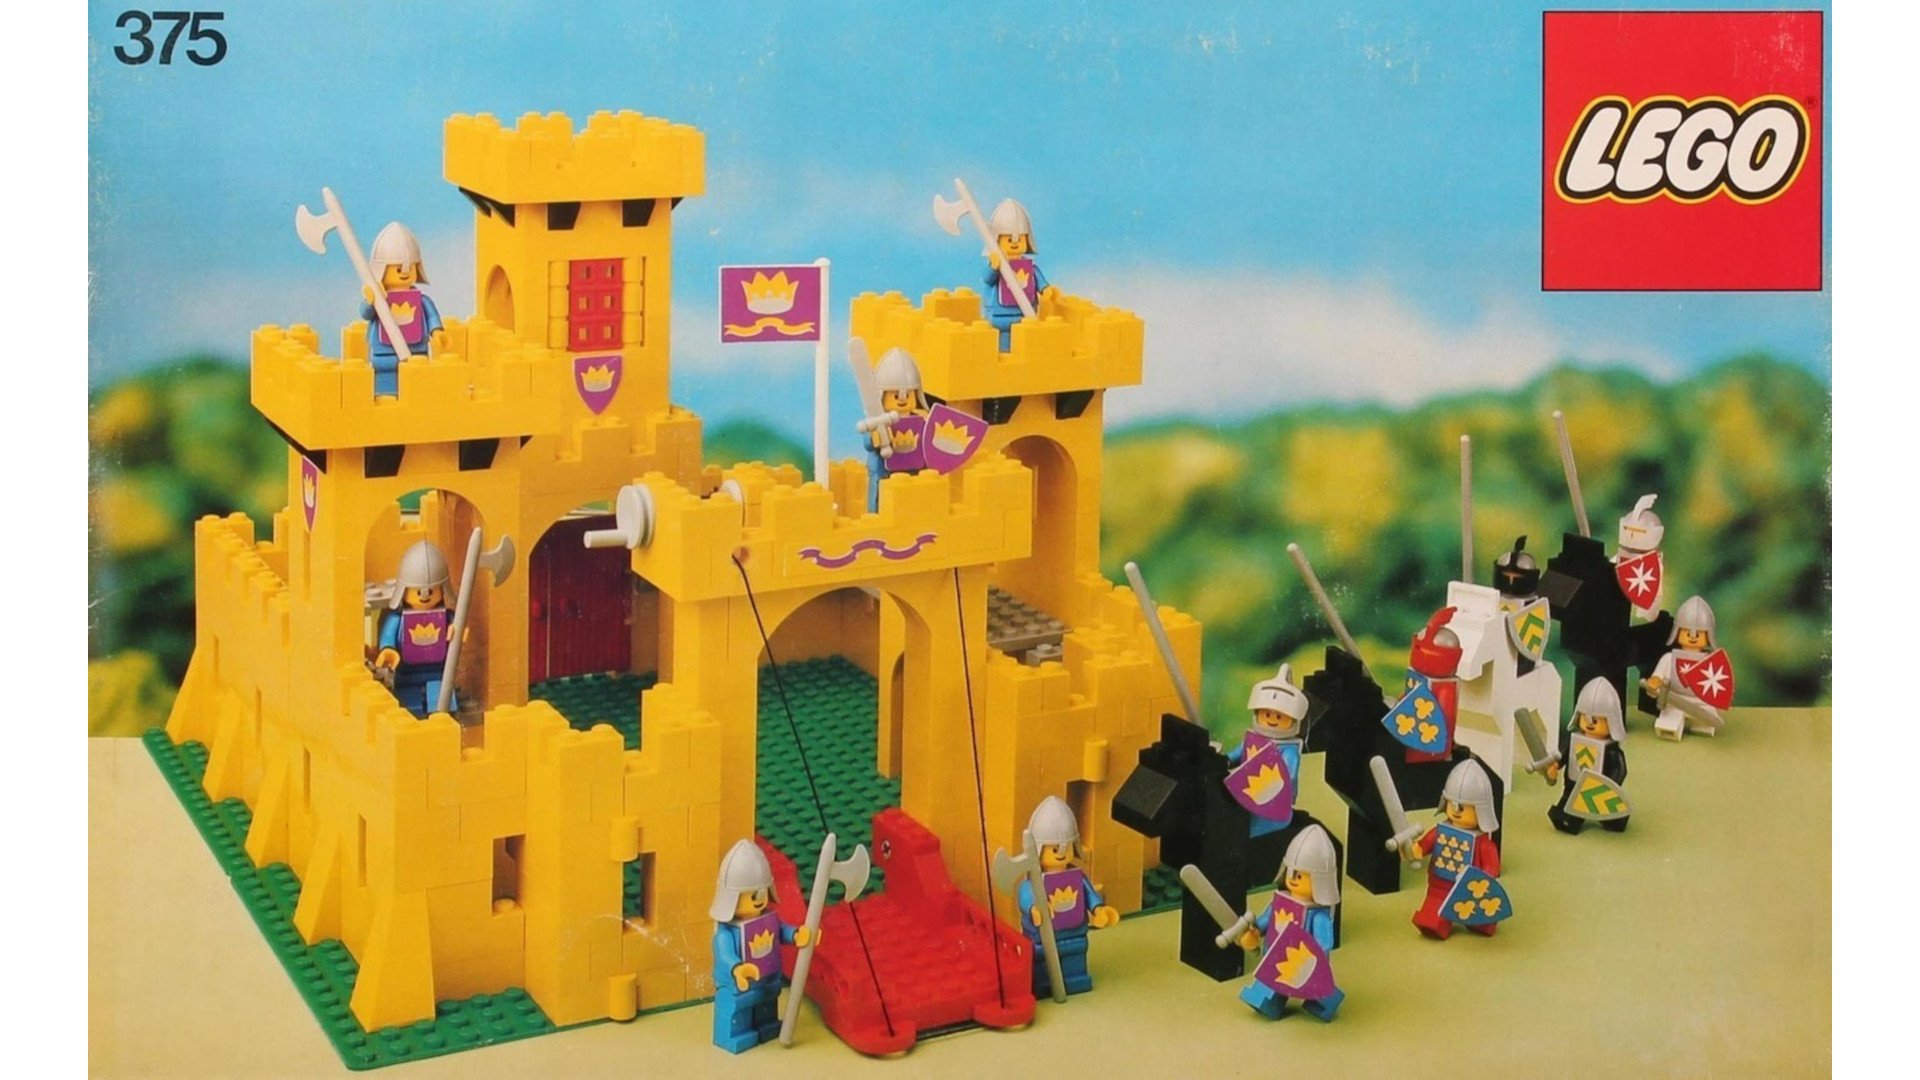 Most expensive LEGO sets guide - LEGO company box art for the 1978 LEGO Castle model showing the yellow castle, with figures for knights, soldiers, and horses